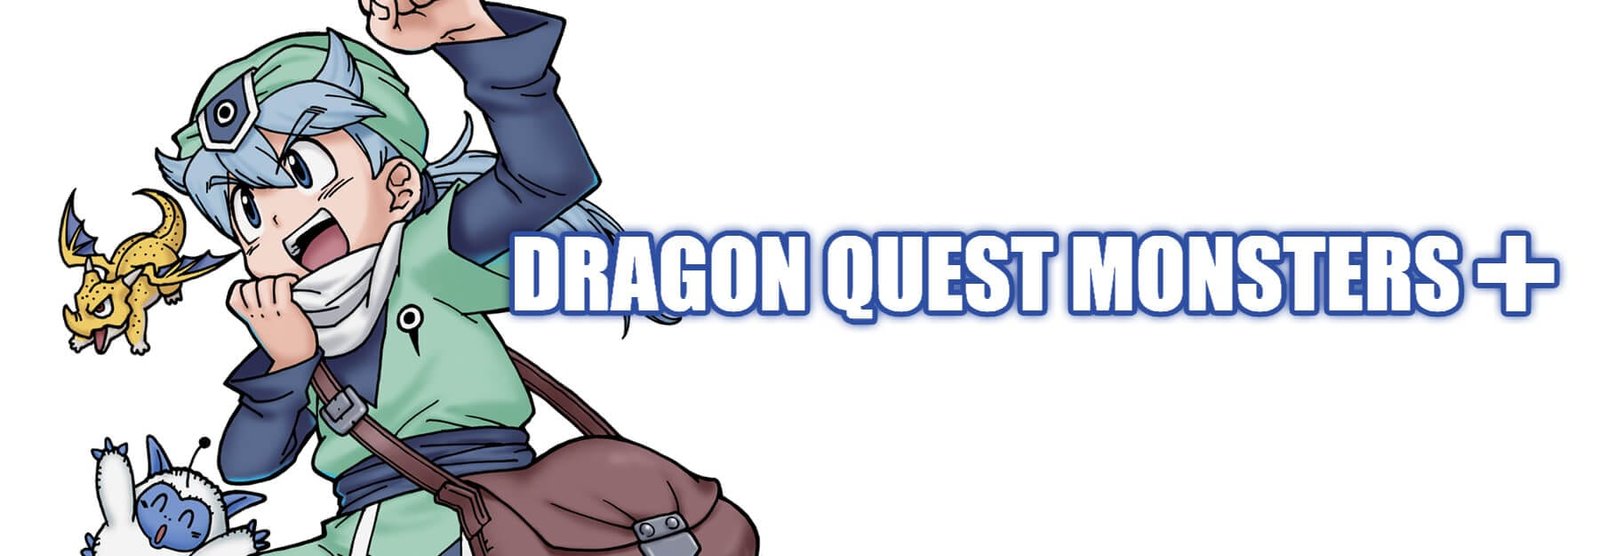 And Now for Something Different: Dragon Quest Monsters+